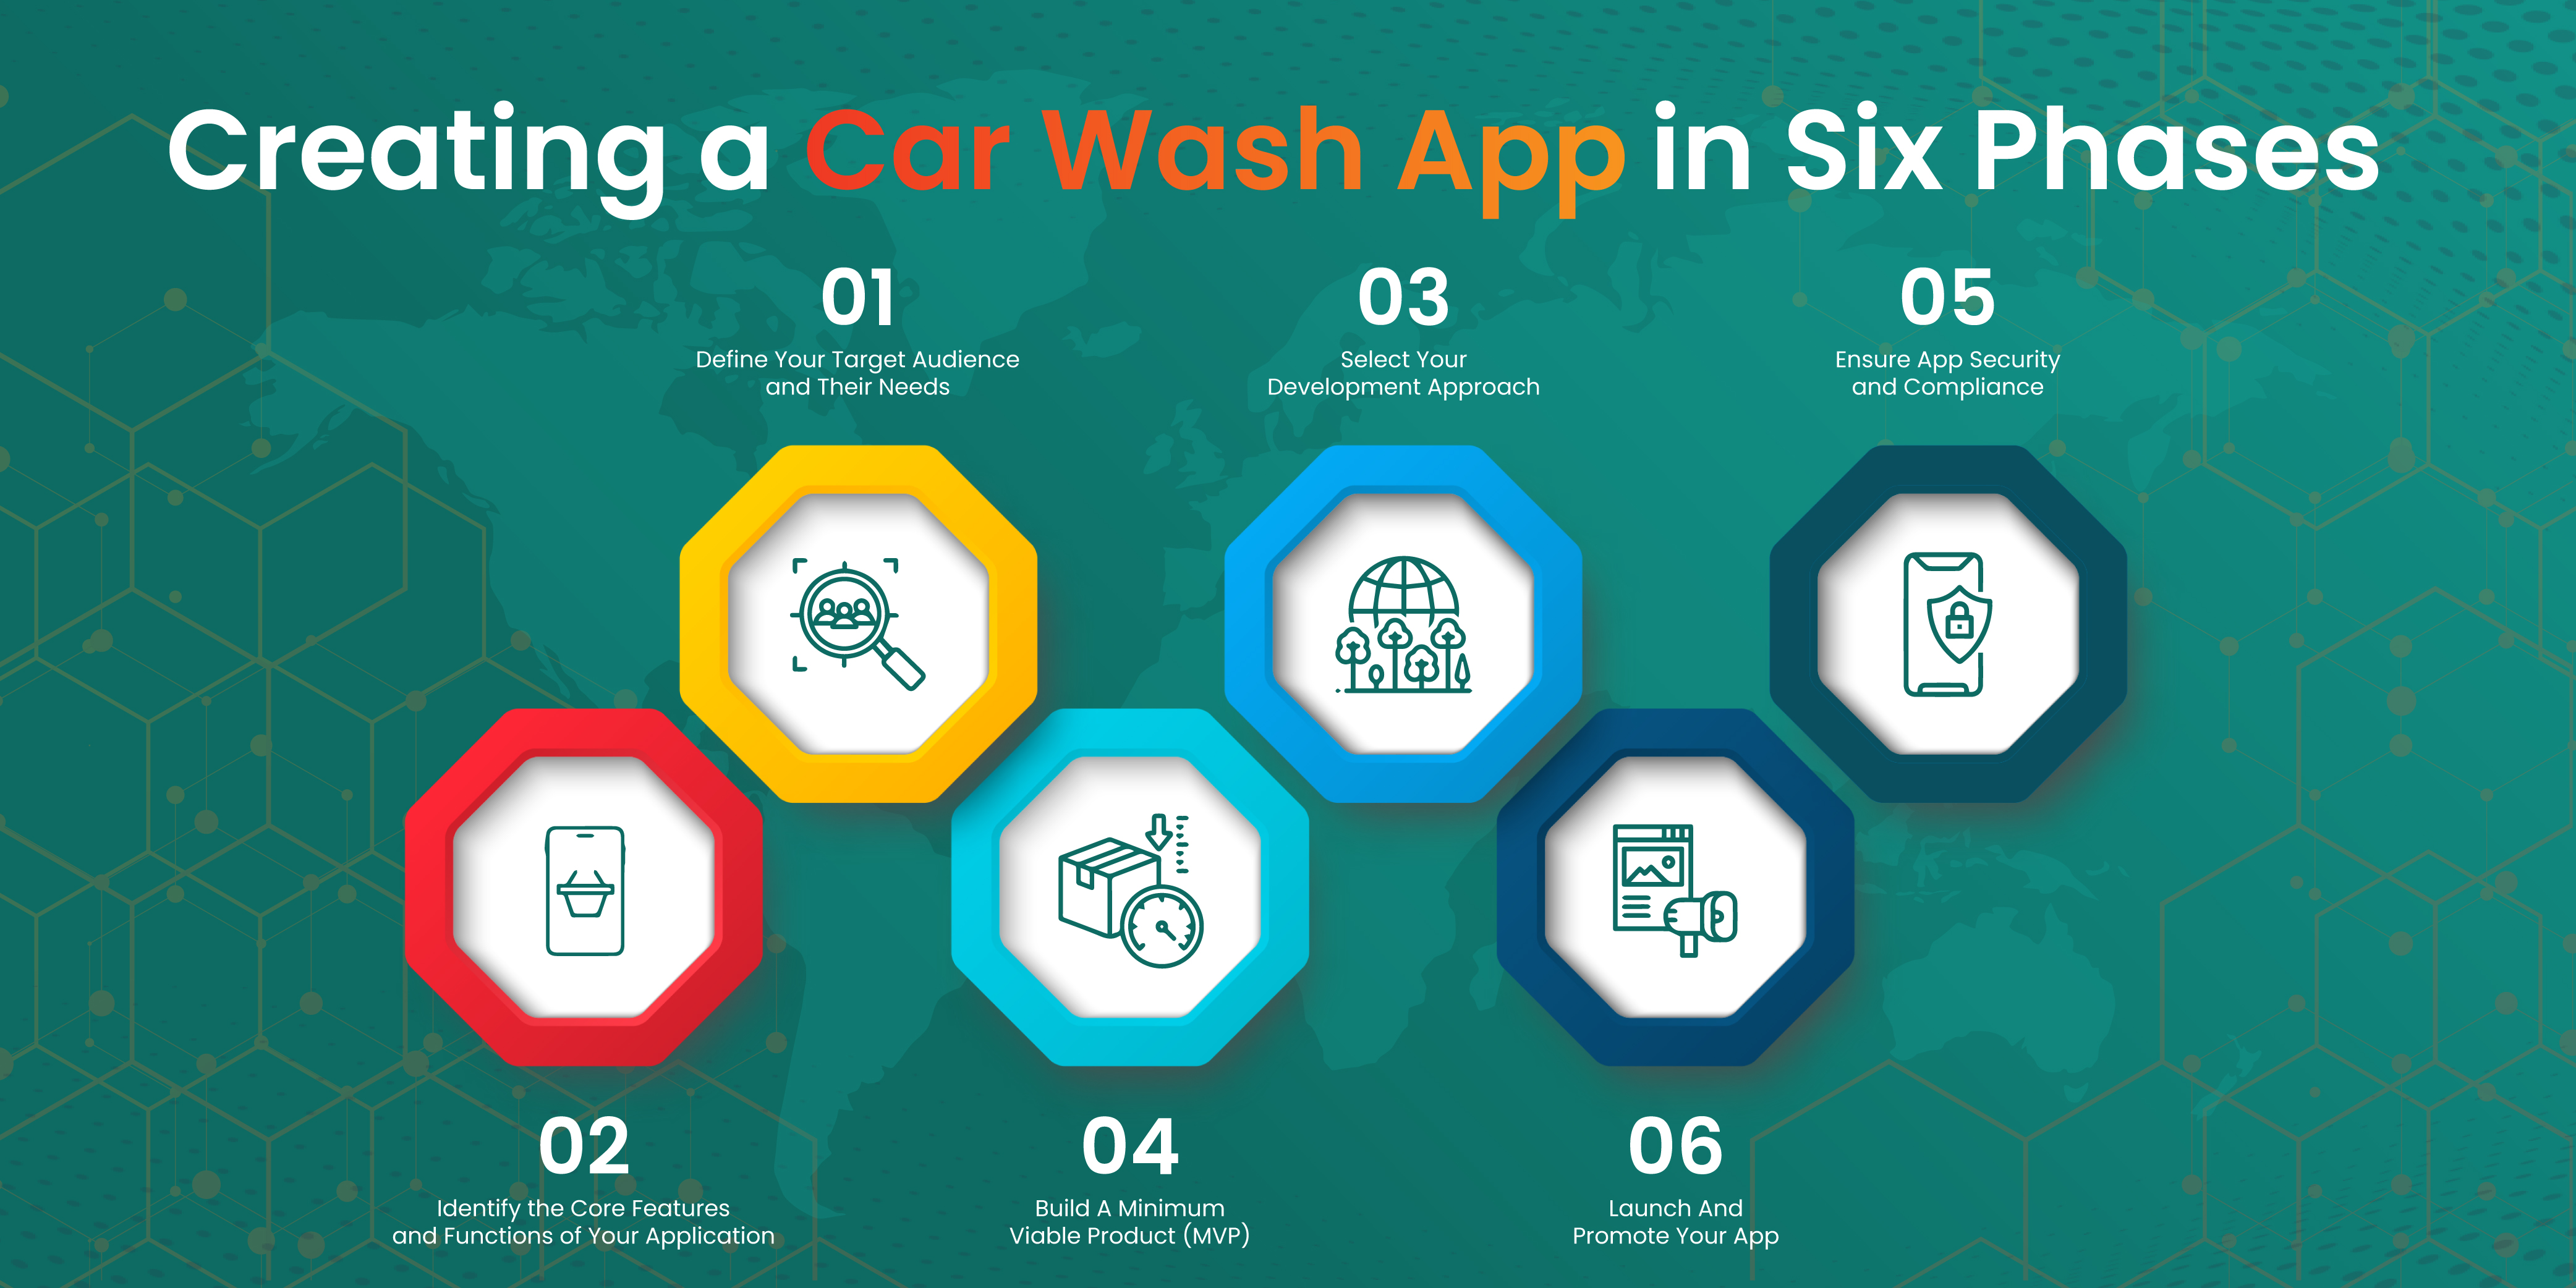 Creating a Car Wash App in Six Phases